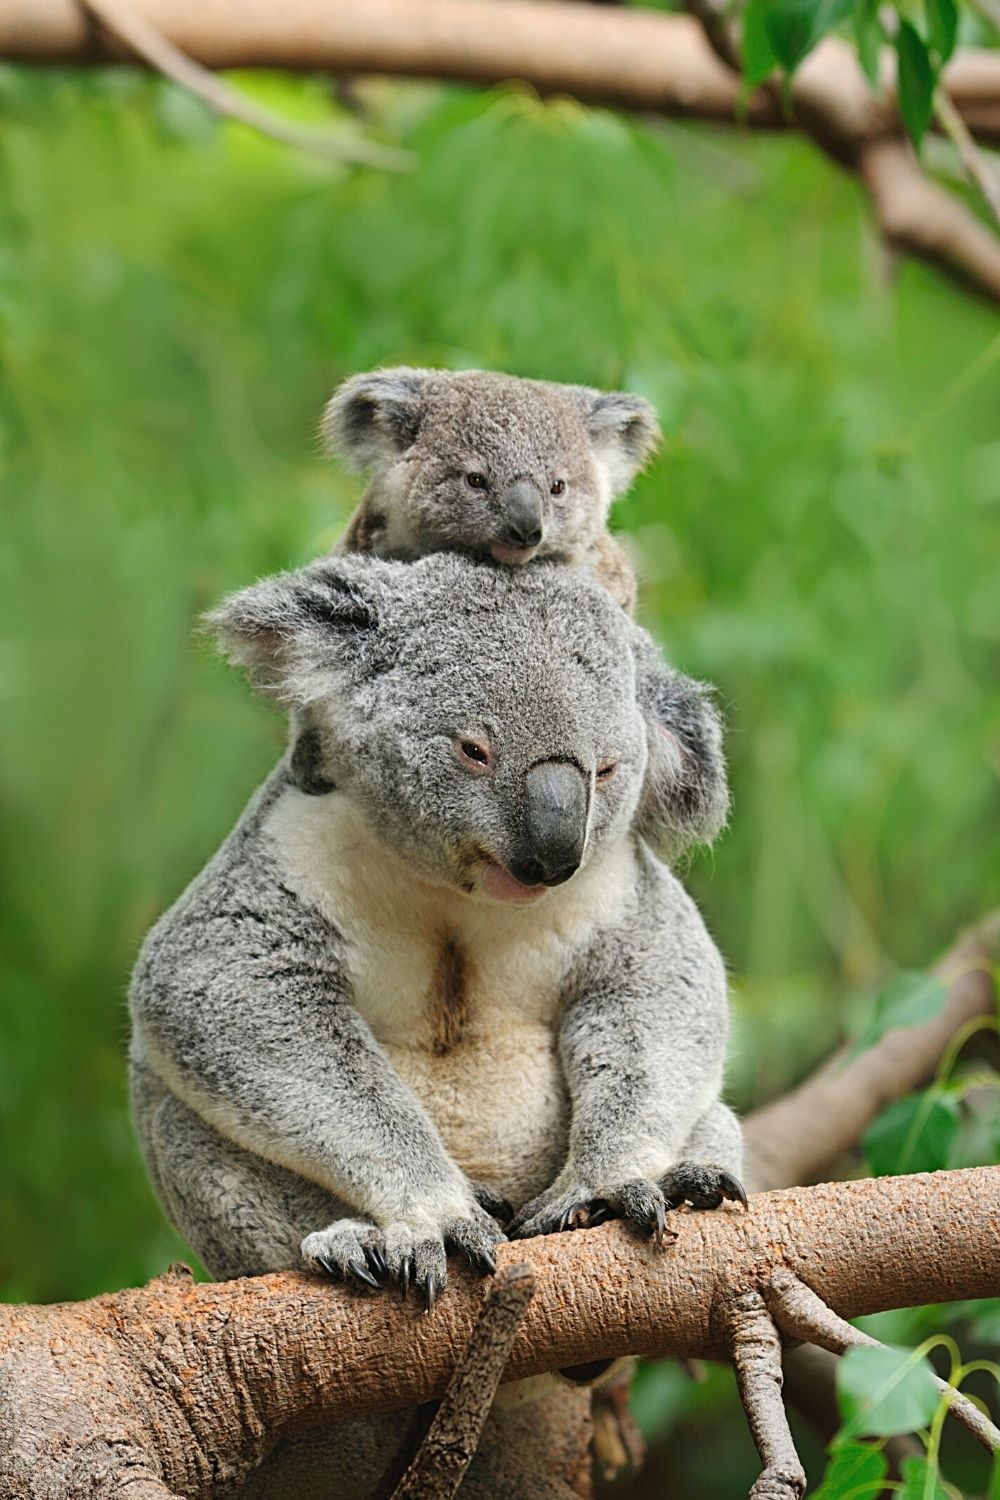 When their joeys are threatened, the mother koalas do everything to protect them and get offensive